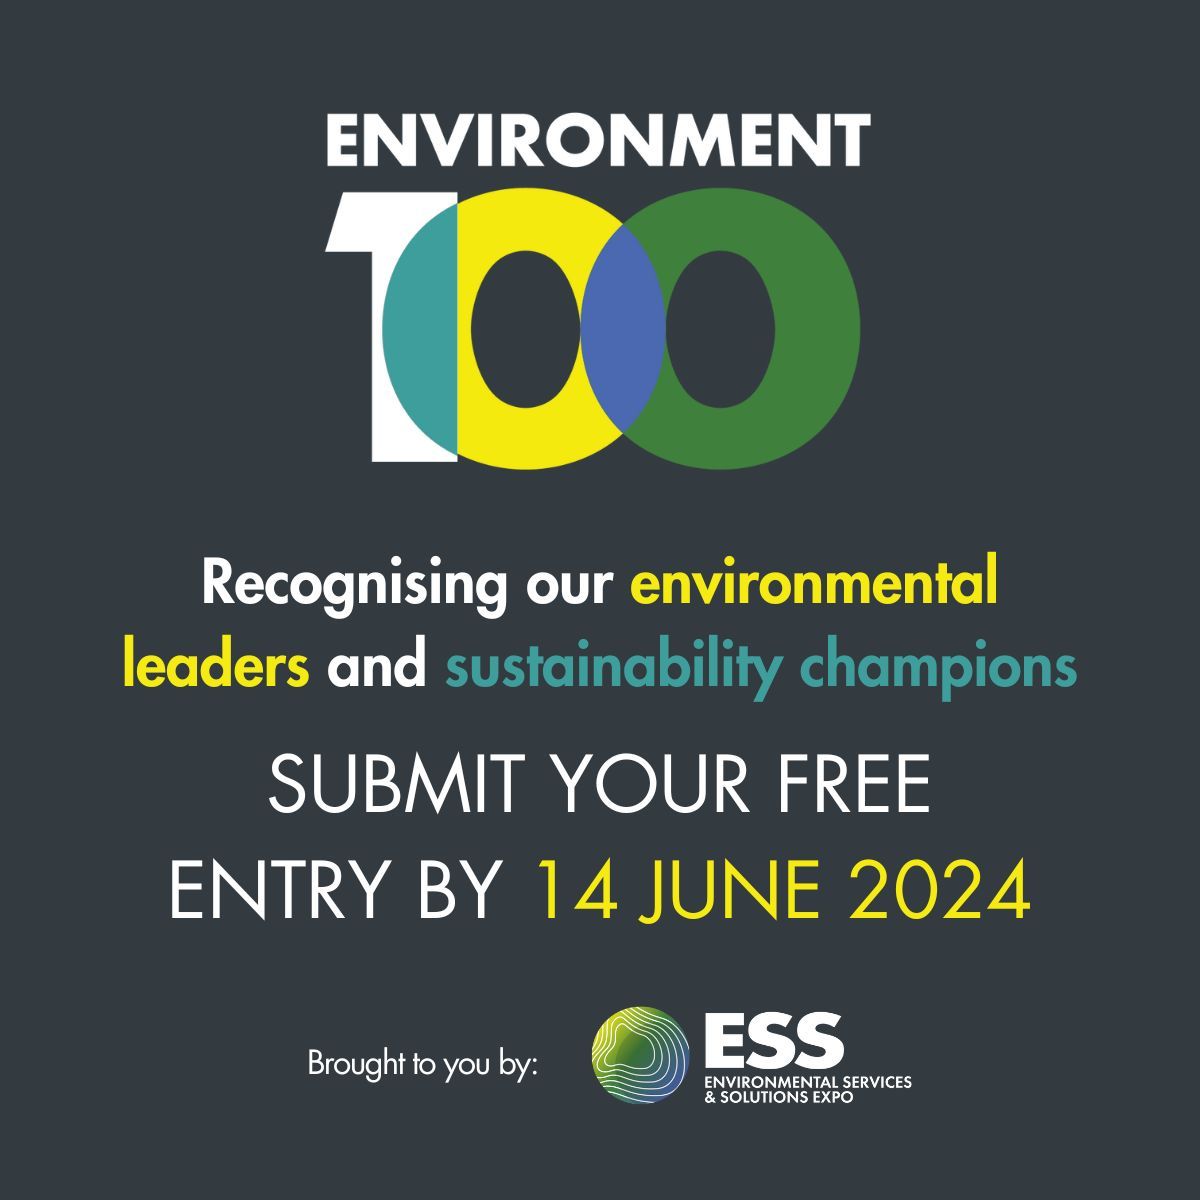 📢 The Environment 100 is an open call to everyone in the UK's environmental sector. Nominating for The Environment 100 is easy and free and it's a great way to acknowledge and celebrate the real change-makers. Make your free nomination now 👉 buff.ly/3KiJ2cD